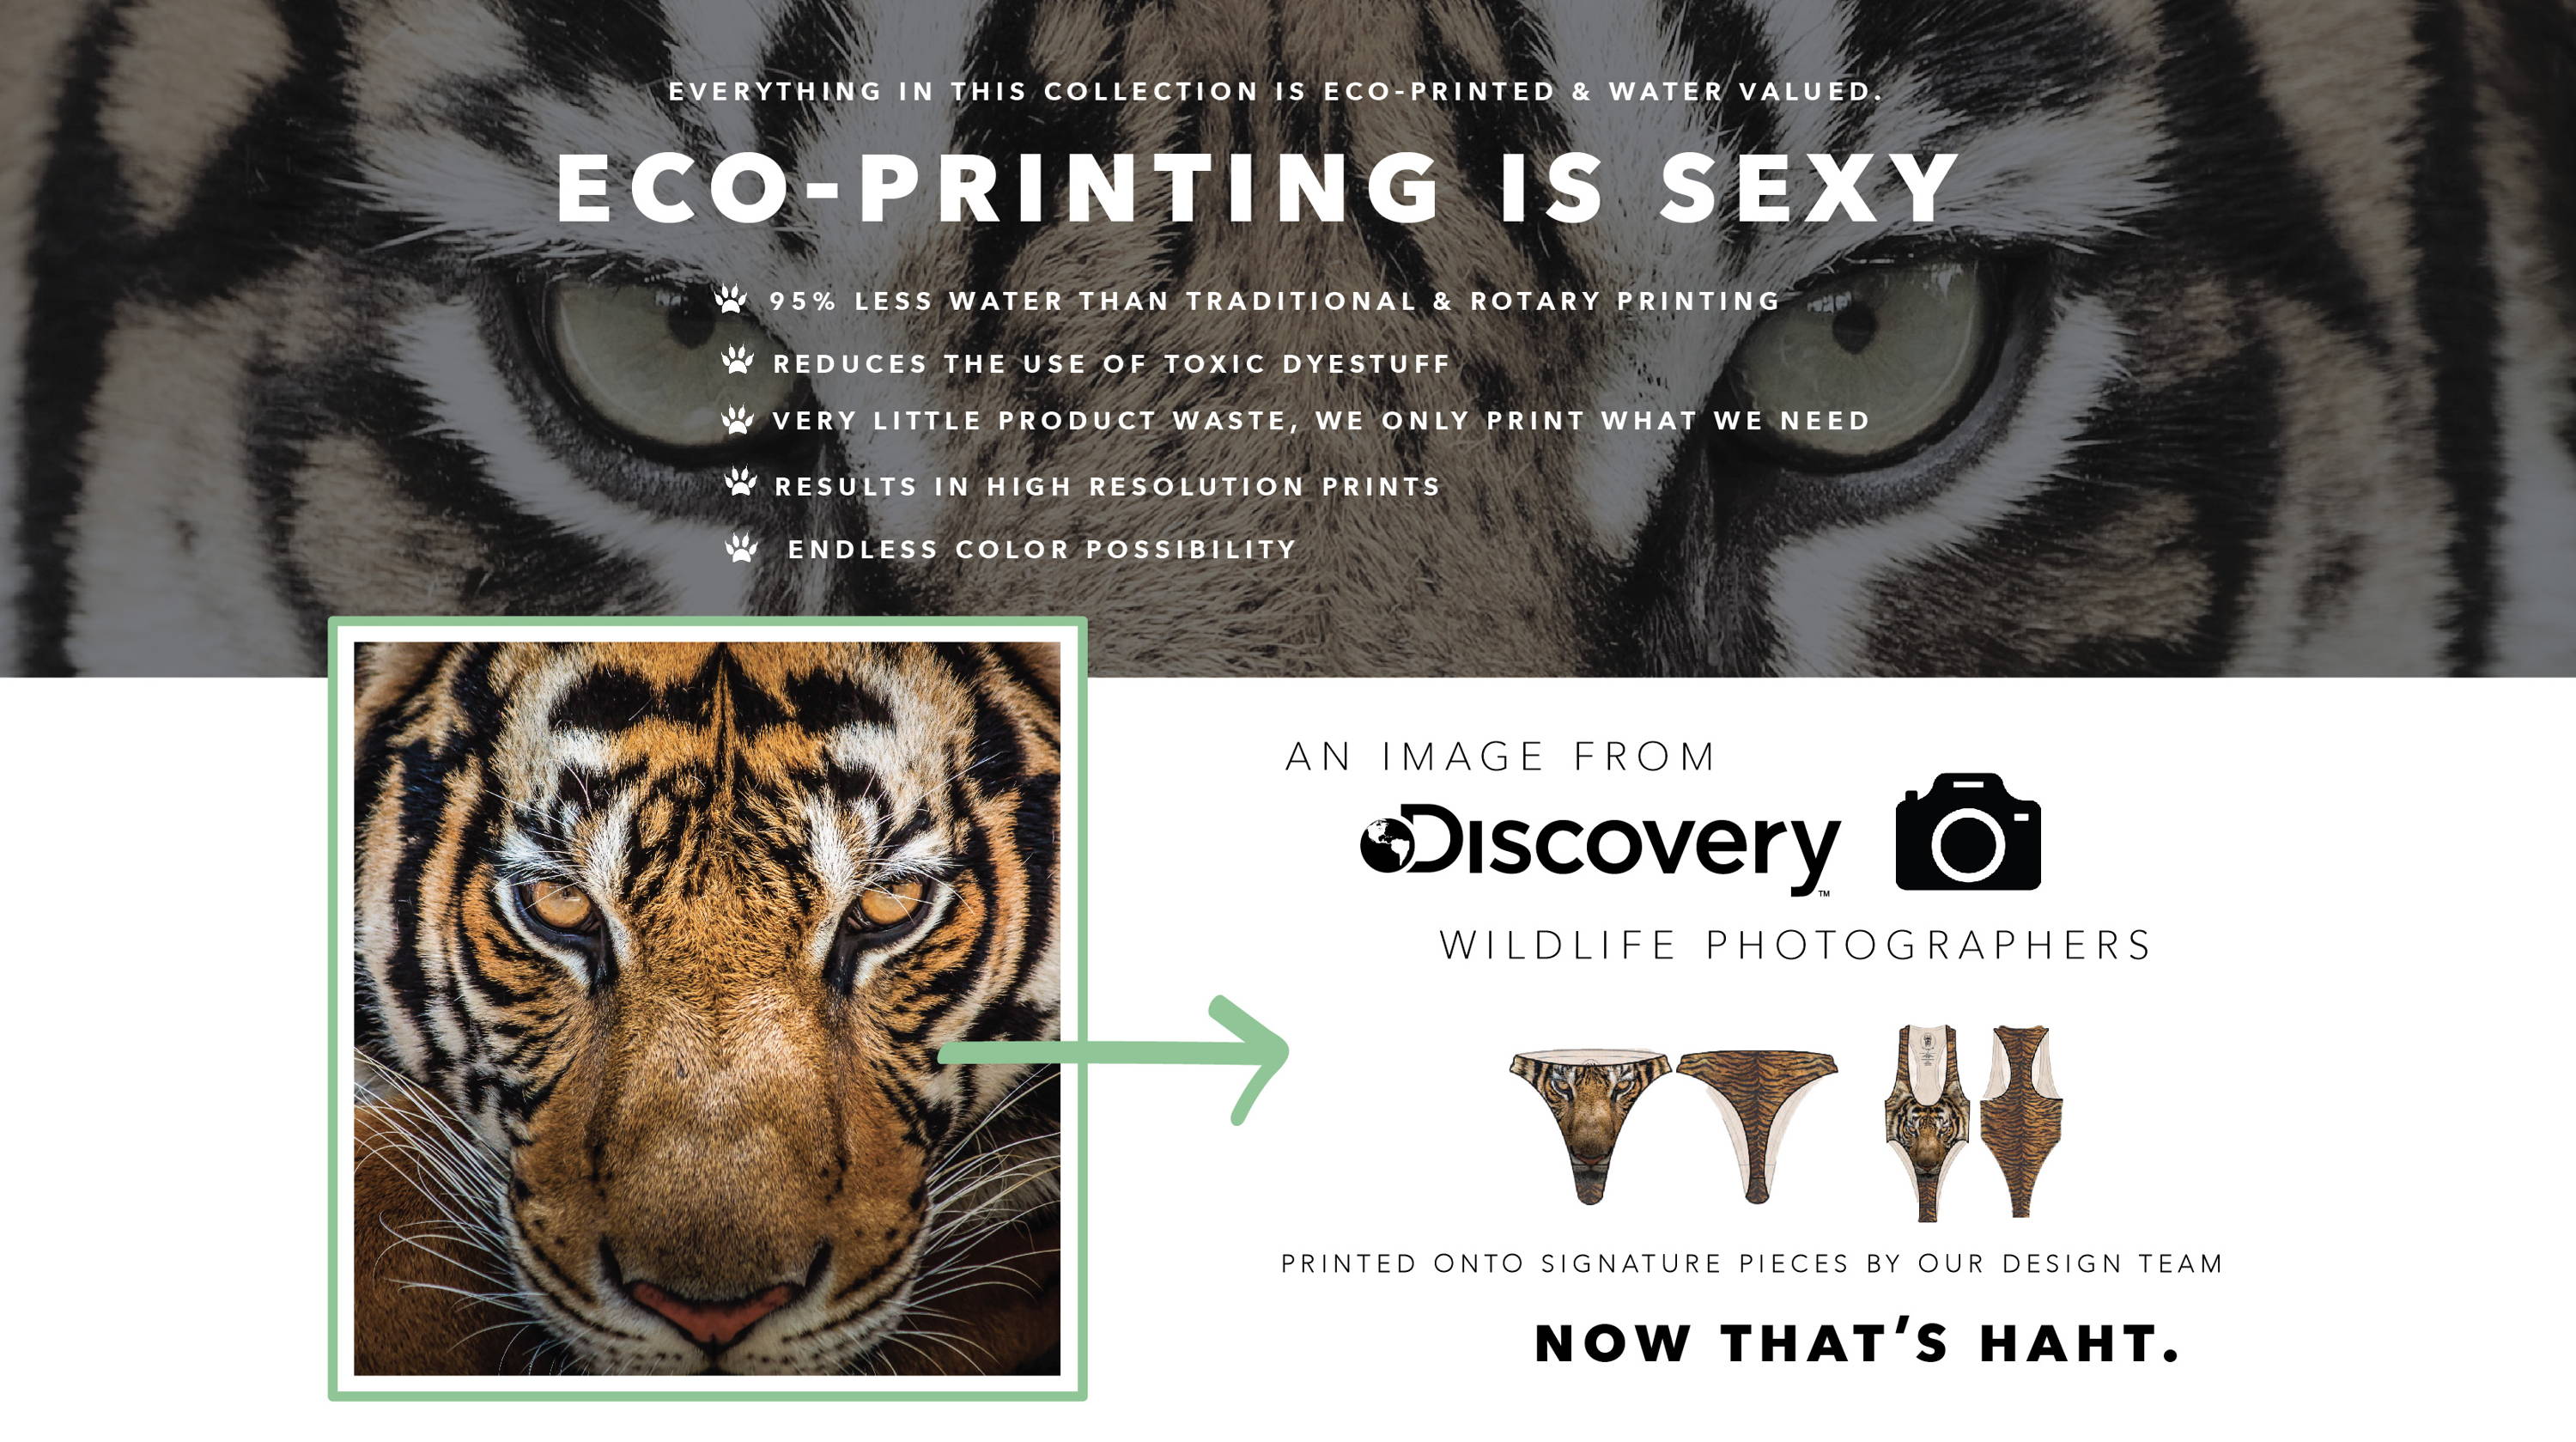 eco printing is sexy and water valued tiger collection print sustainable. uses less water than traditional reduces toxic dyestuff no product waste, detailed prints, endless colros. discovery wildlife photo of tiger cat animal leopard on bikini underwear swimwear robe sleepwear